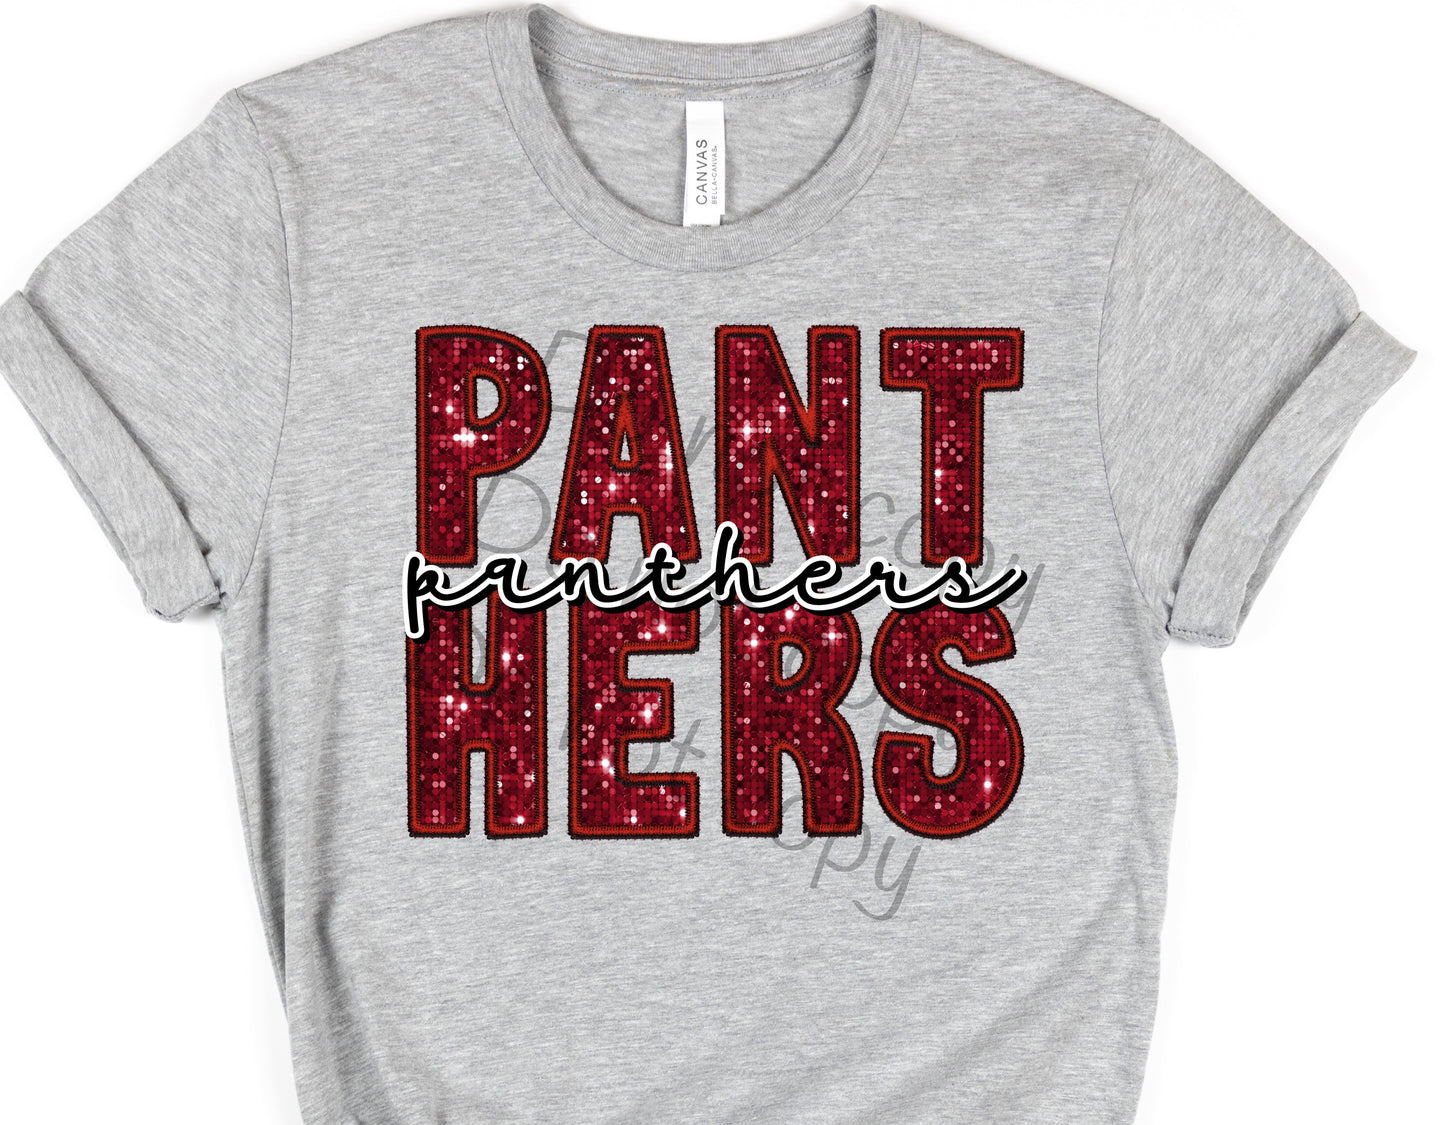 Panthers red sequin panthers-DTF